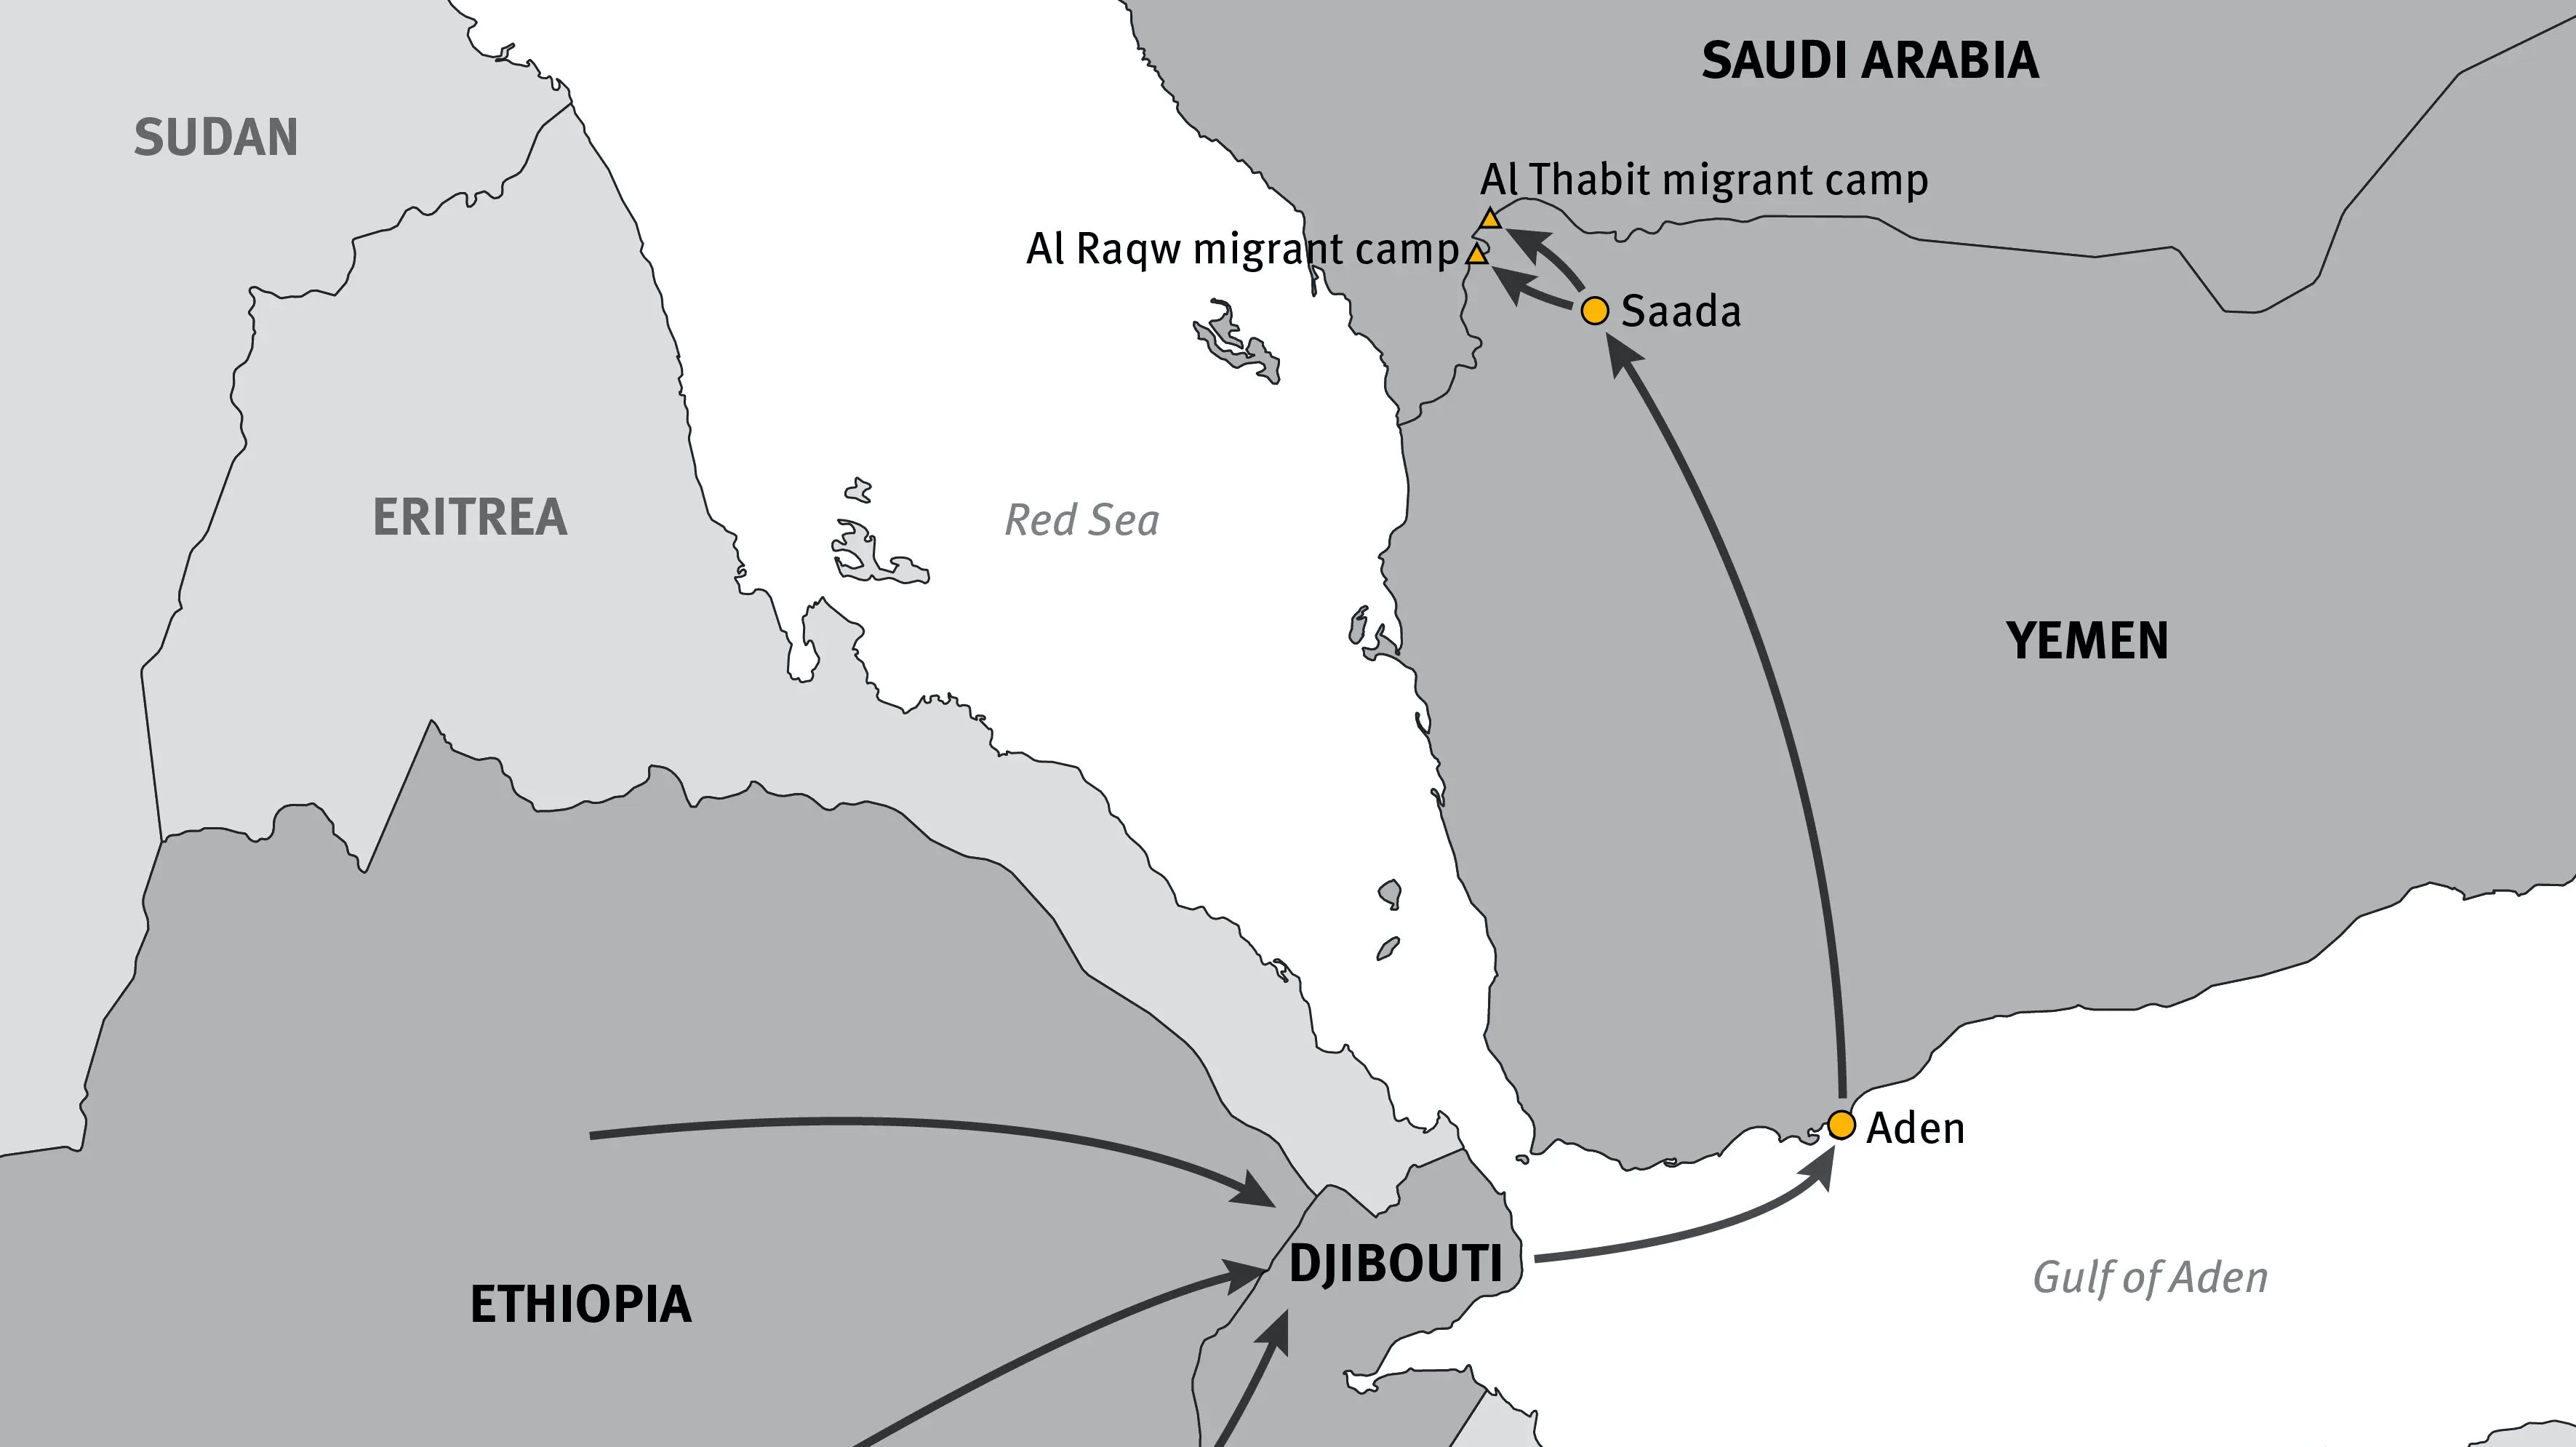 Map of the migration route from Ethiopia to Saudi Arabia through Yemen.